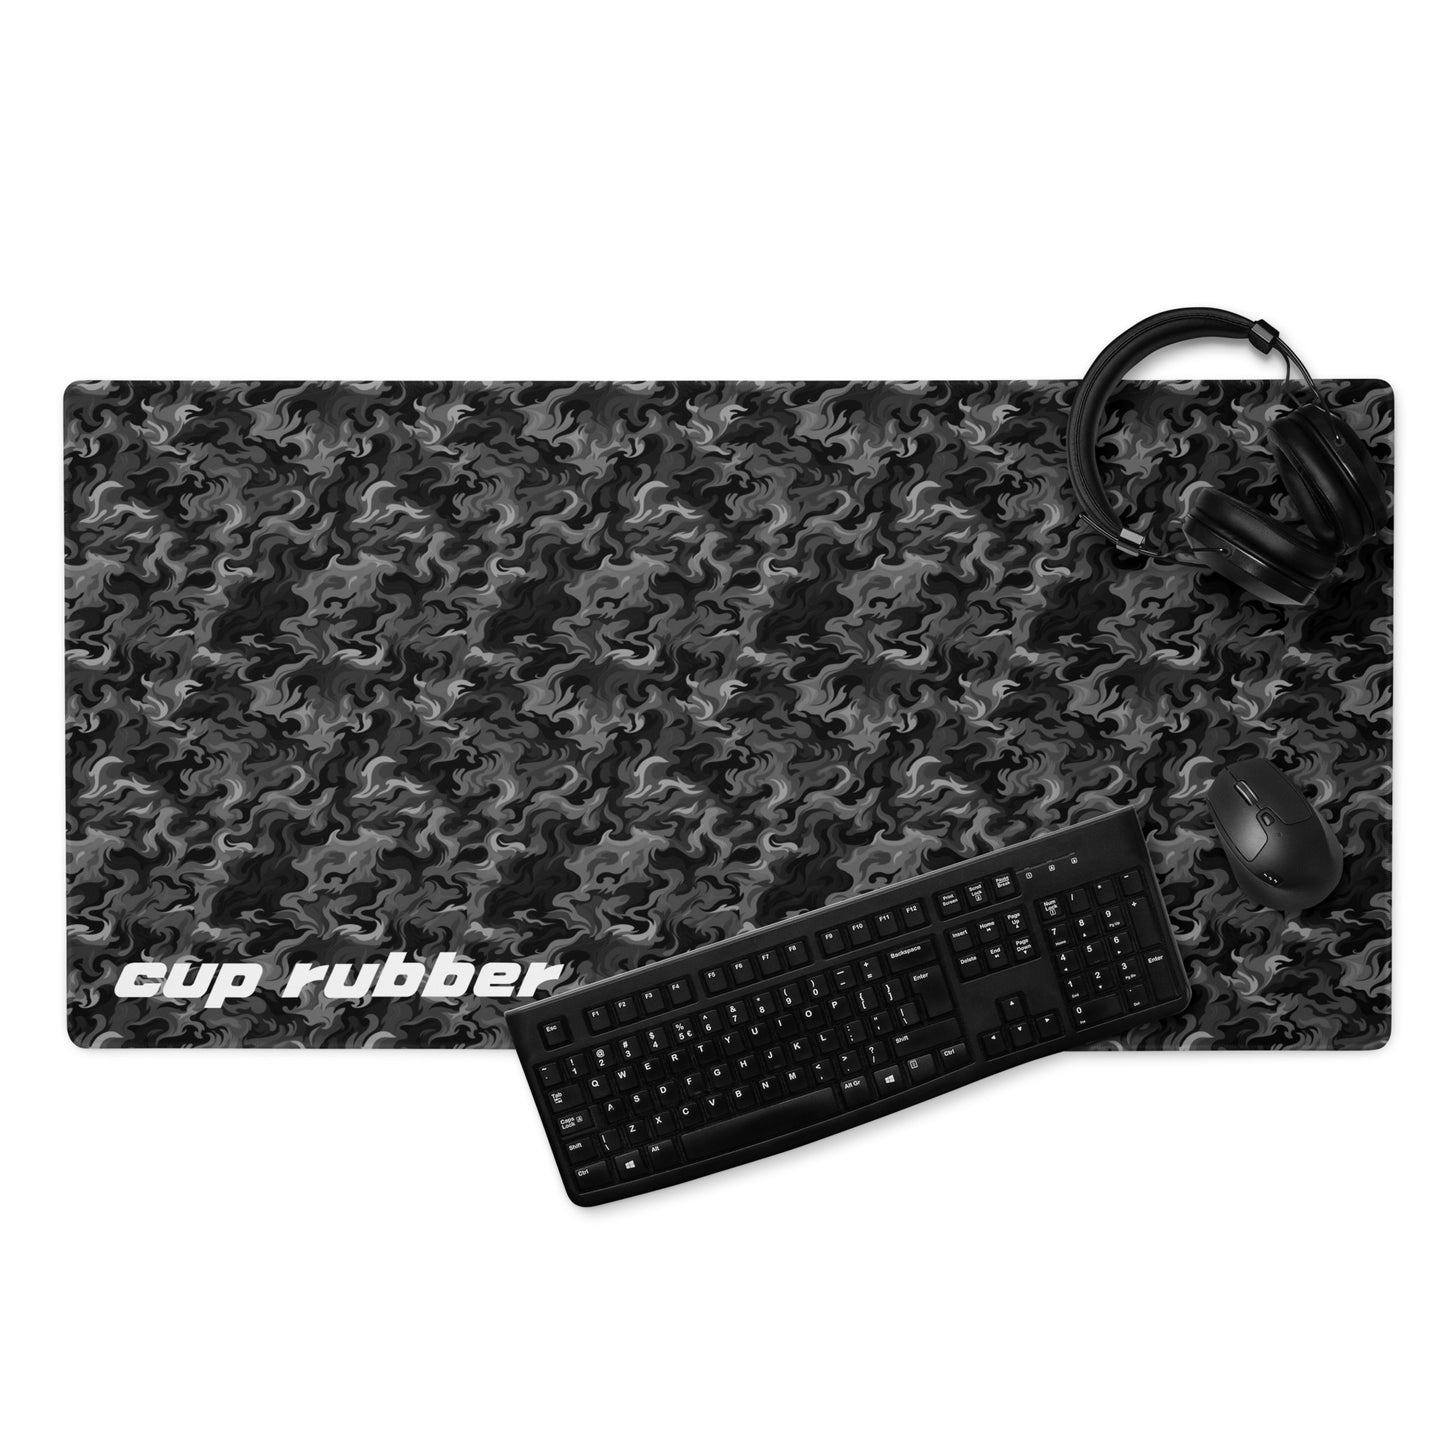 A 36" x 18" desk pad with a camo pattern all over it and the word "Cup Rubber" in the bottom left corner displayed with a keyboard, headphones and a mouse. Black and Charcoal in color.